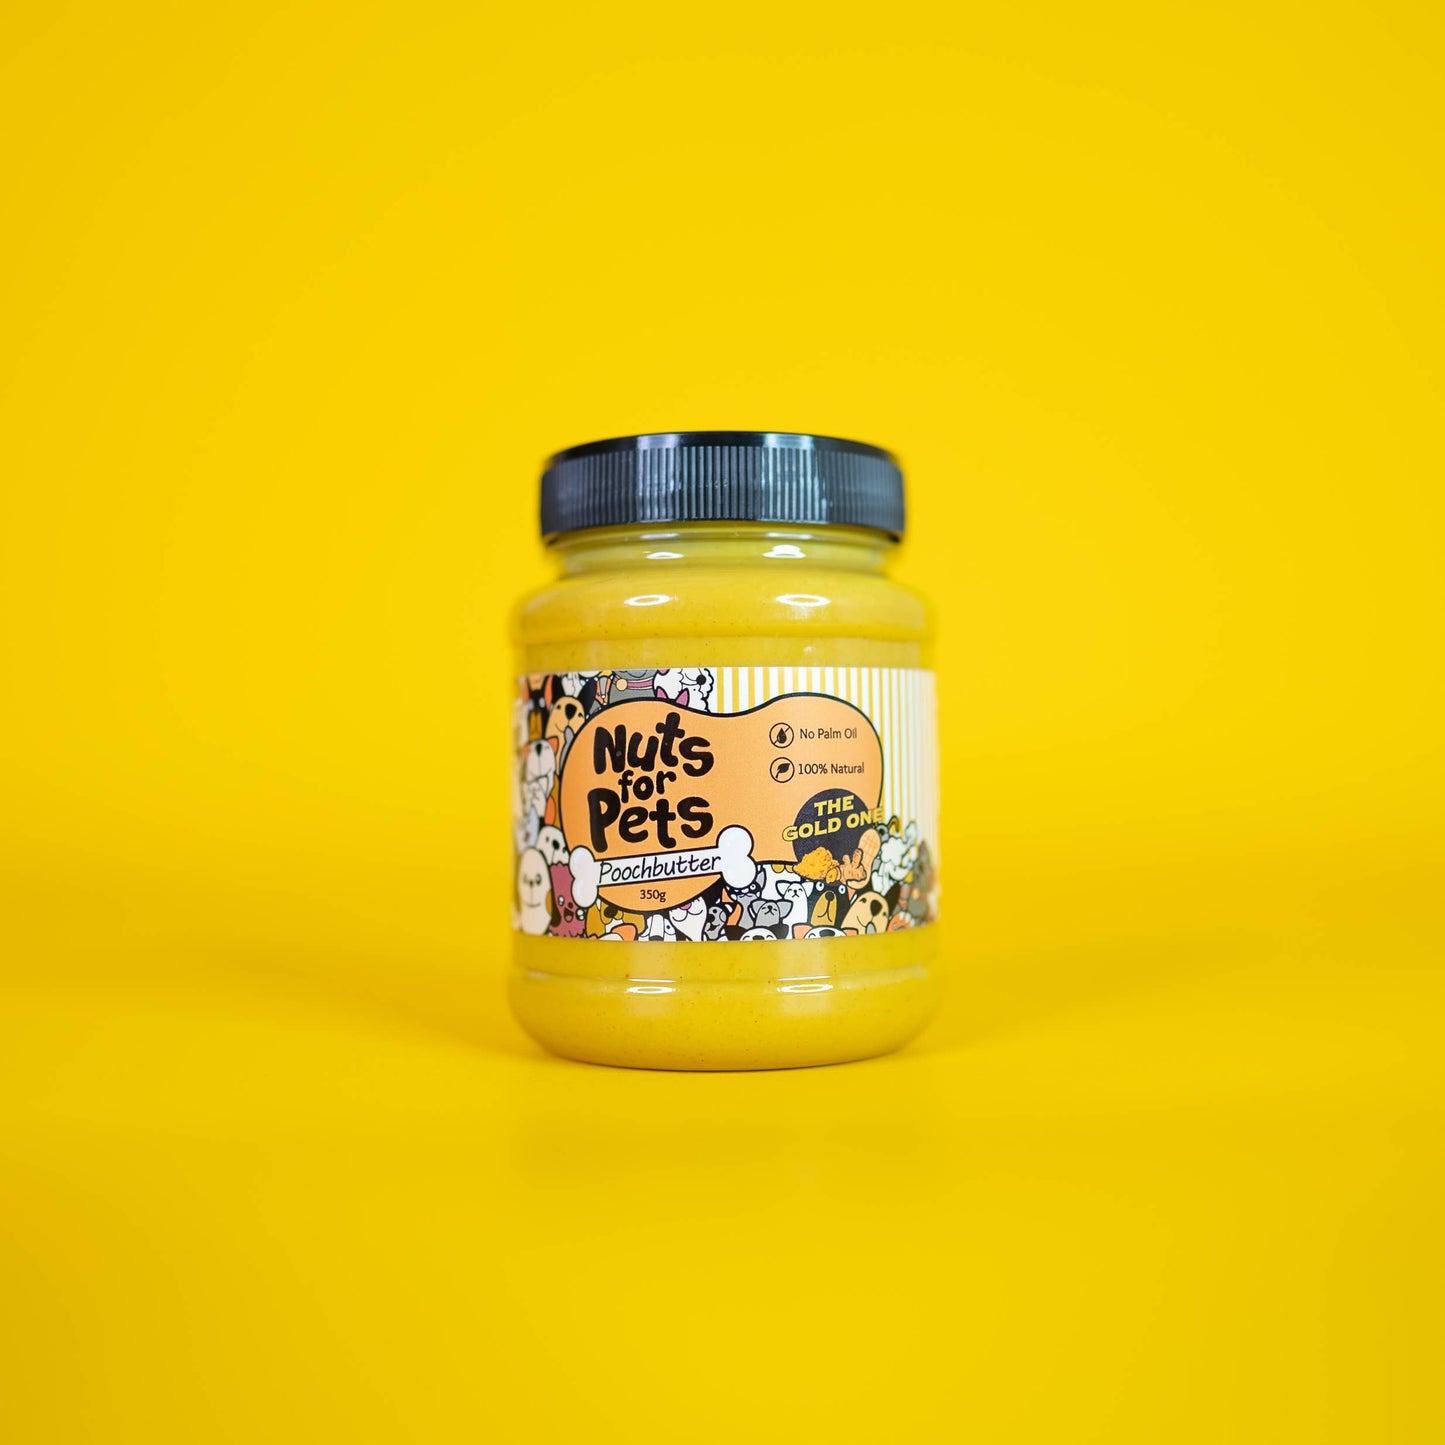 Poochbutter with Turmeric 350g Peanut butter for dogs